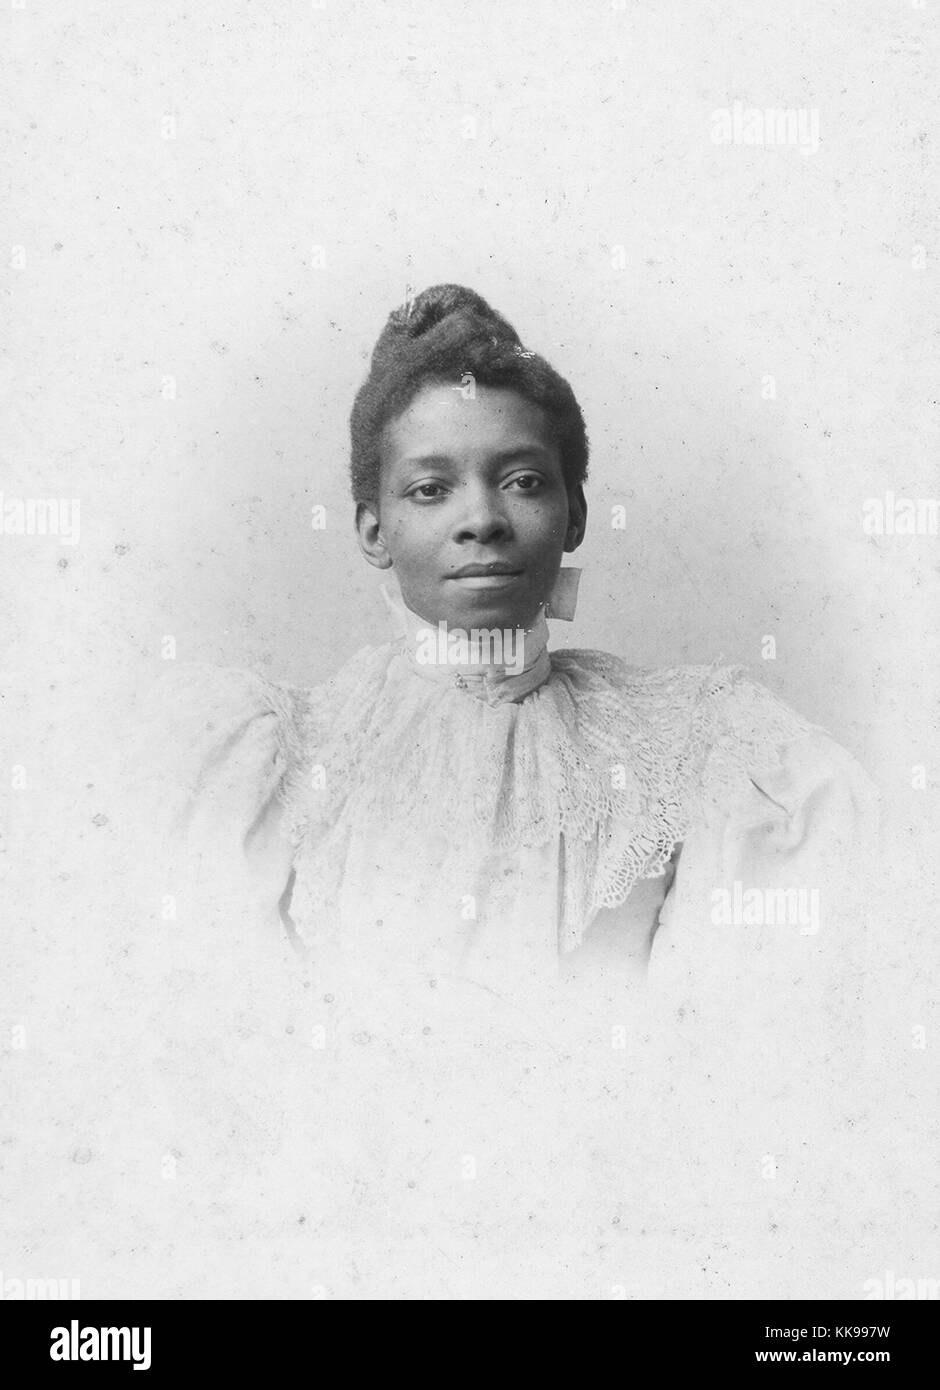 A photographic portrait of a woman wearing a light colored dress, the dress has lace work extending from the neck line to her chest, she has her hair tied up in a bun, 1900. From the New York Public Library. Stock Photo